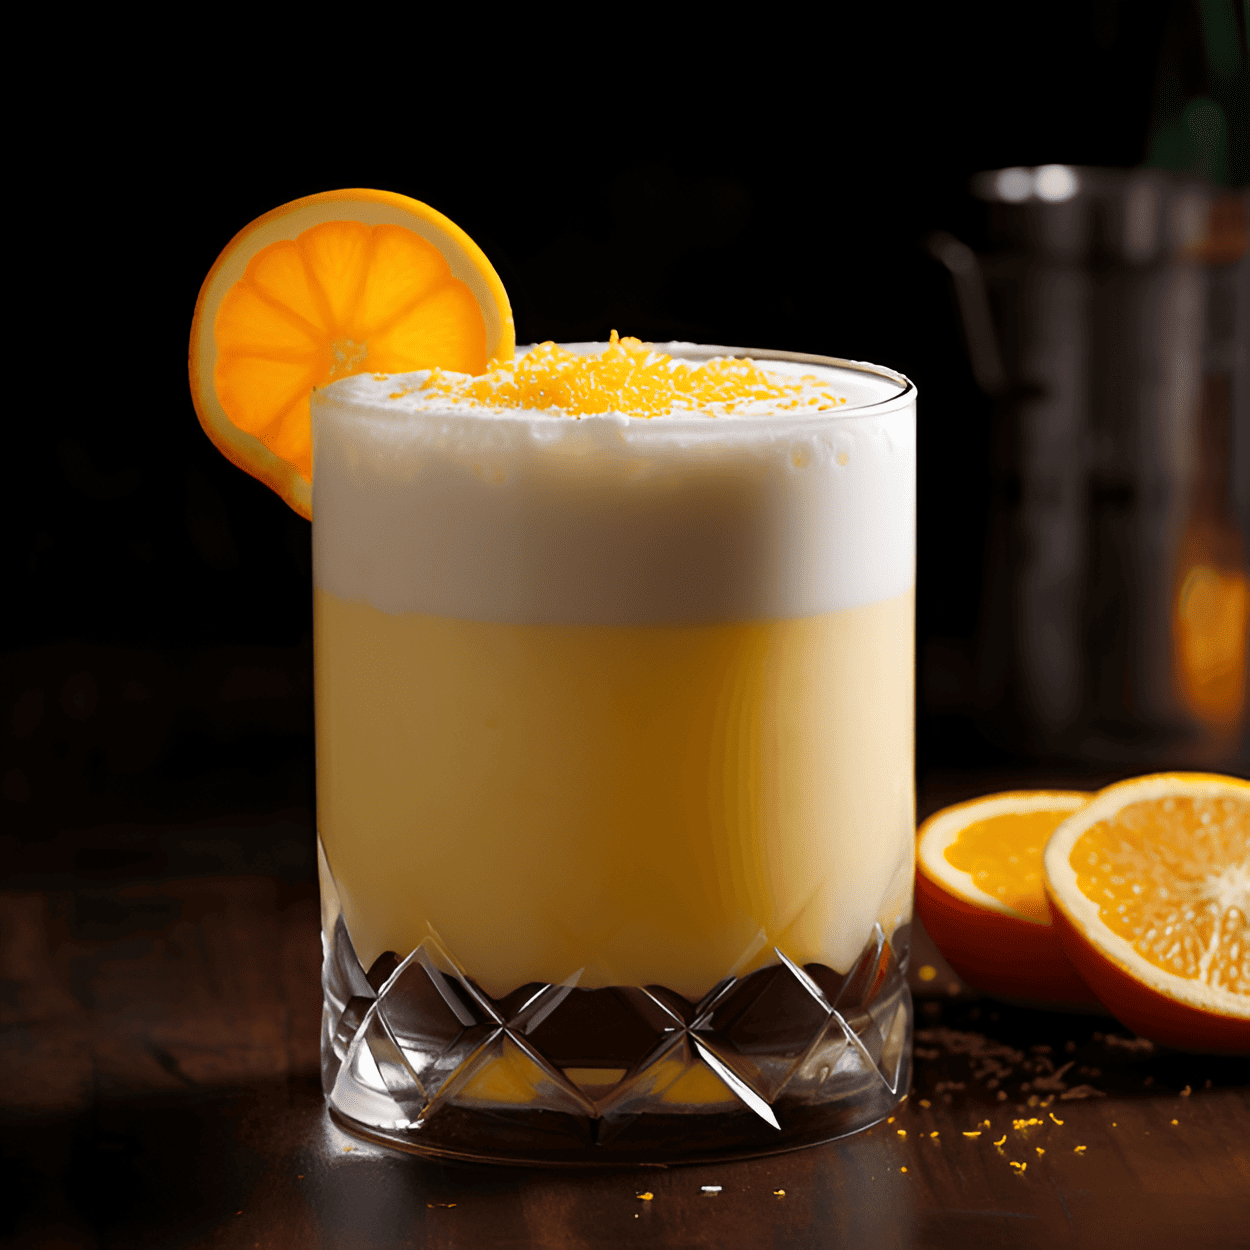 Creamsicle Cocktail Recipe - The Creamsicle cocktail is a sweet, creamy, and smooth drink with a delightful balance of orange and vanilla flavors. It has a rich and velvety texture, reminiscent of a melted ice cream treat, and a refreshing citrusy undertone that cuts through the sweetness.